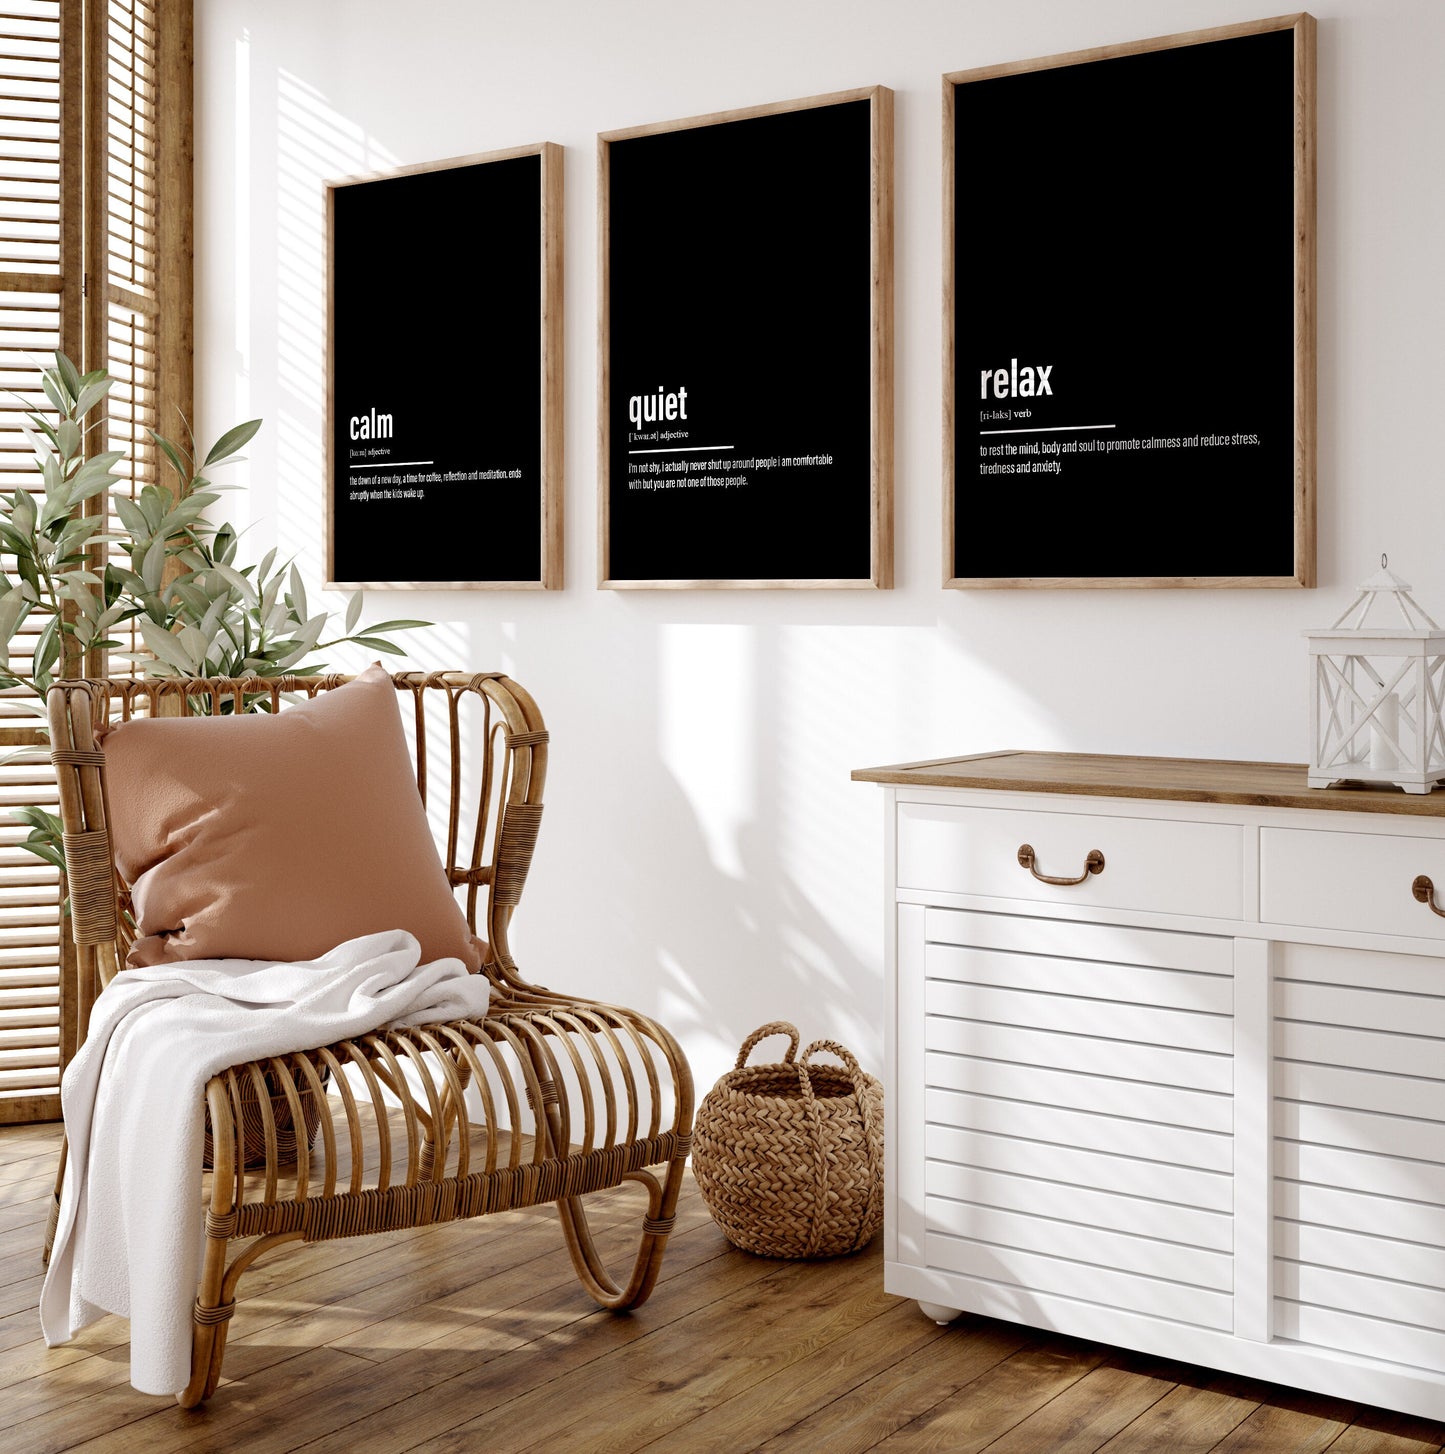 Calm, Relax, Quiet Set Of 3 Definition Prints - Magic Posters